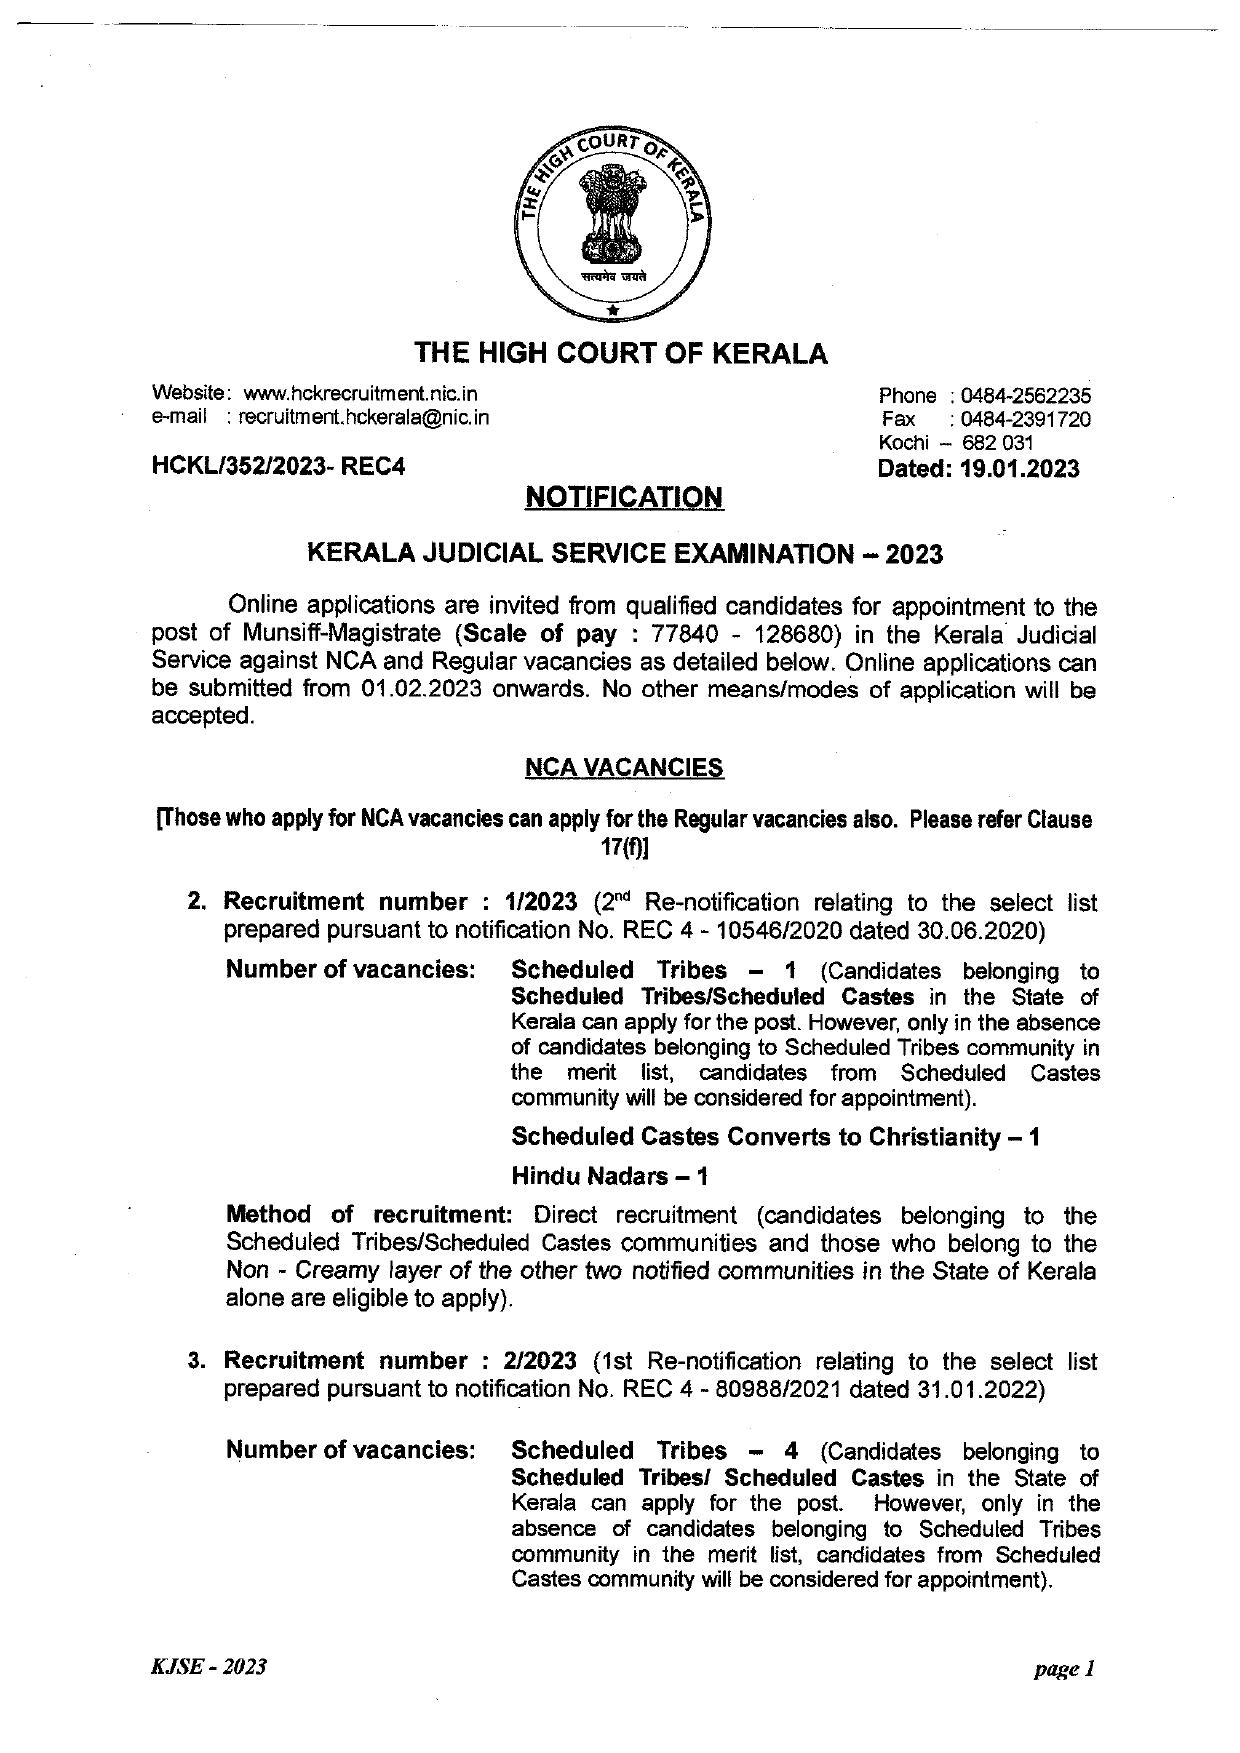 High Court of Kerala (HCK) Invites Application for 69 Munsiff - Magistrate Recruitment 2023 - Page 1